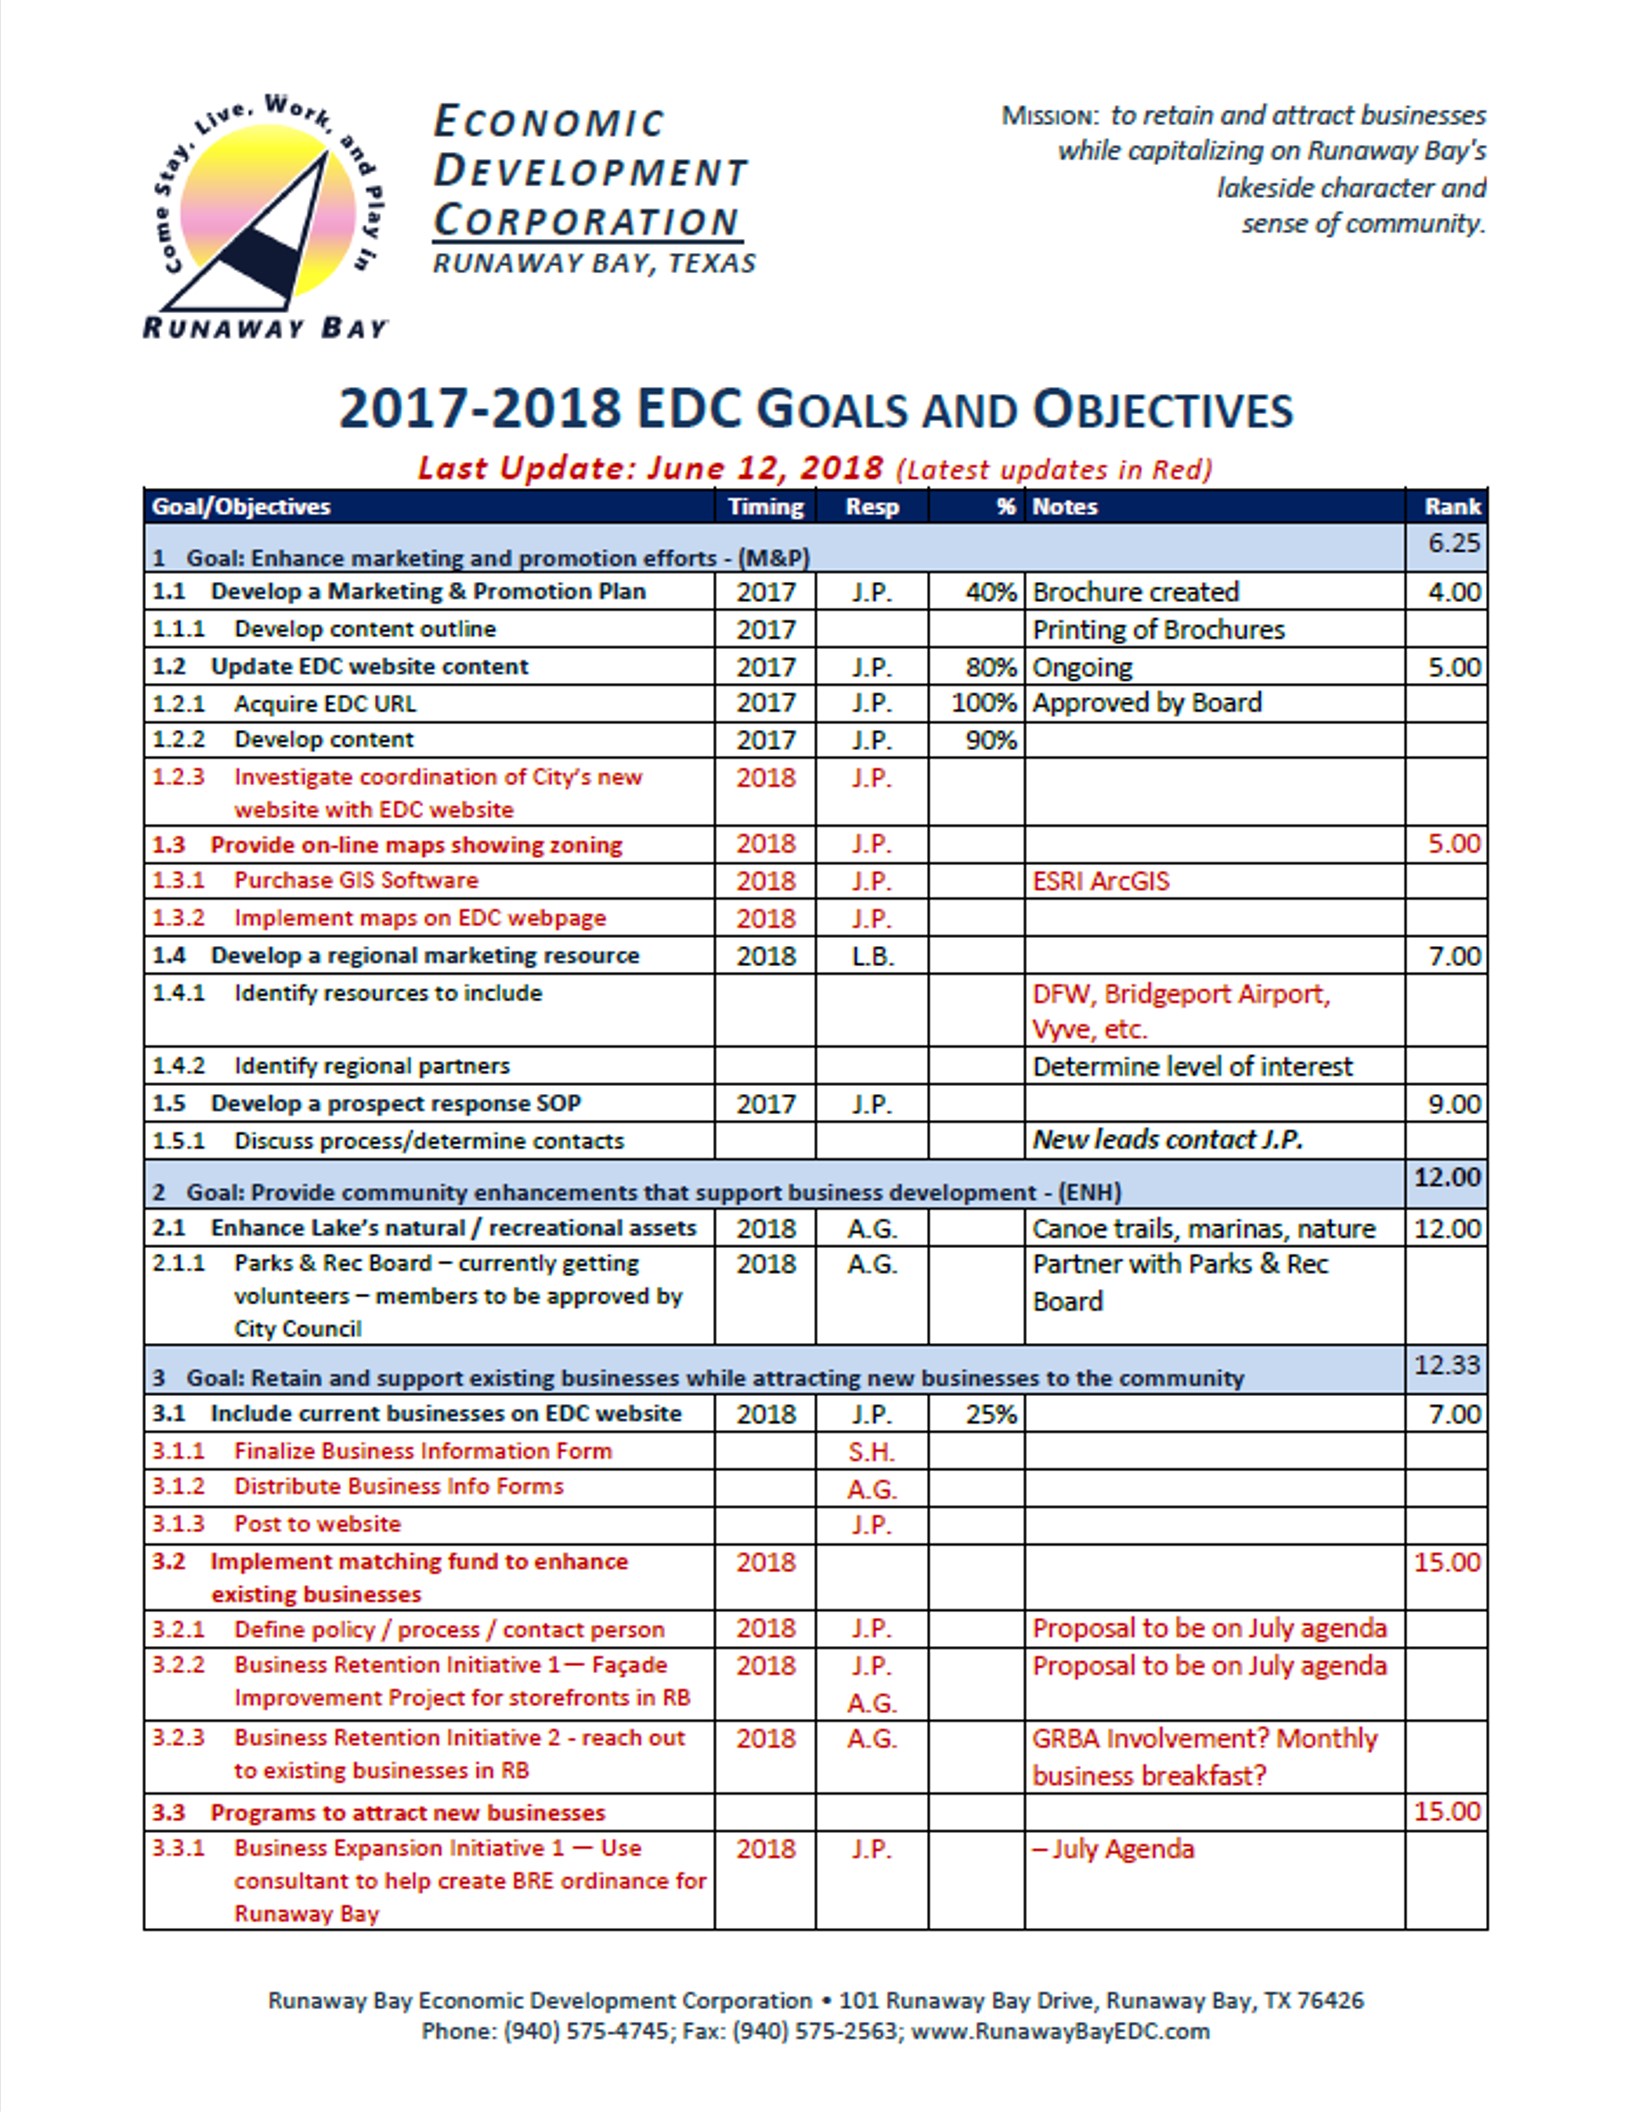 RBEDC 2018 Action Plan